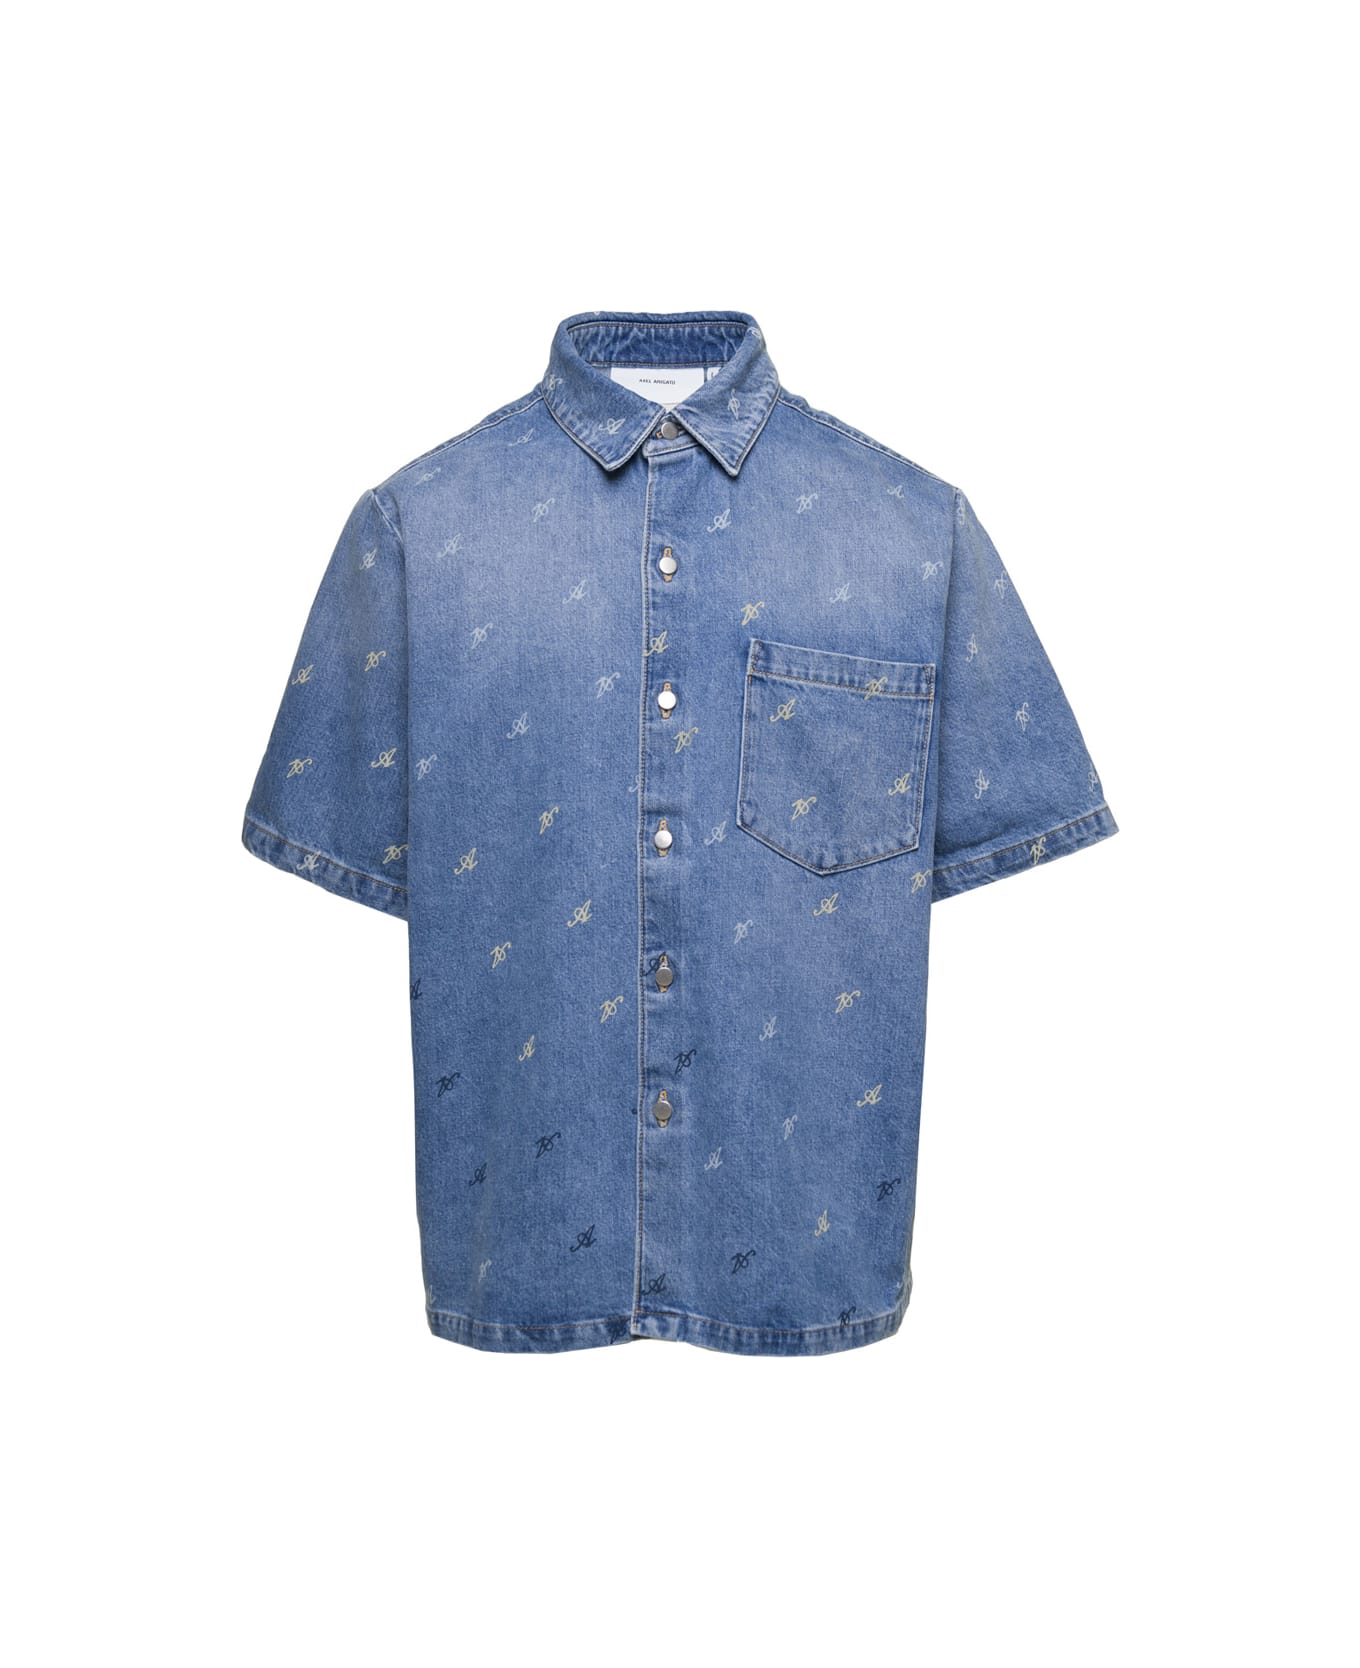 Axel Arigato Blue Jeans Shirt With Logo All Over In Denim Man - Blu シャツ